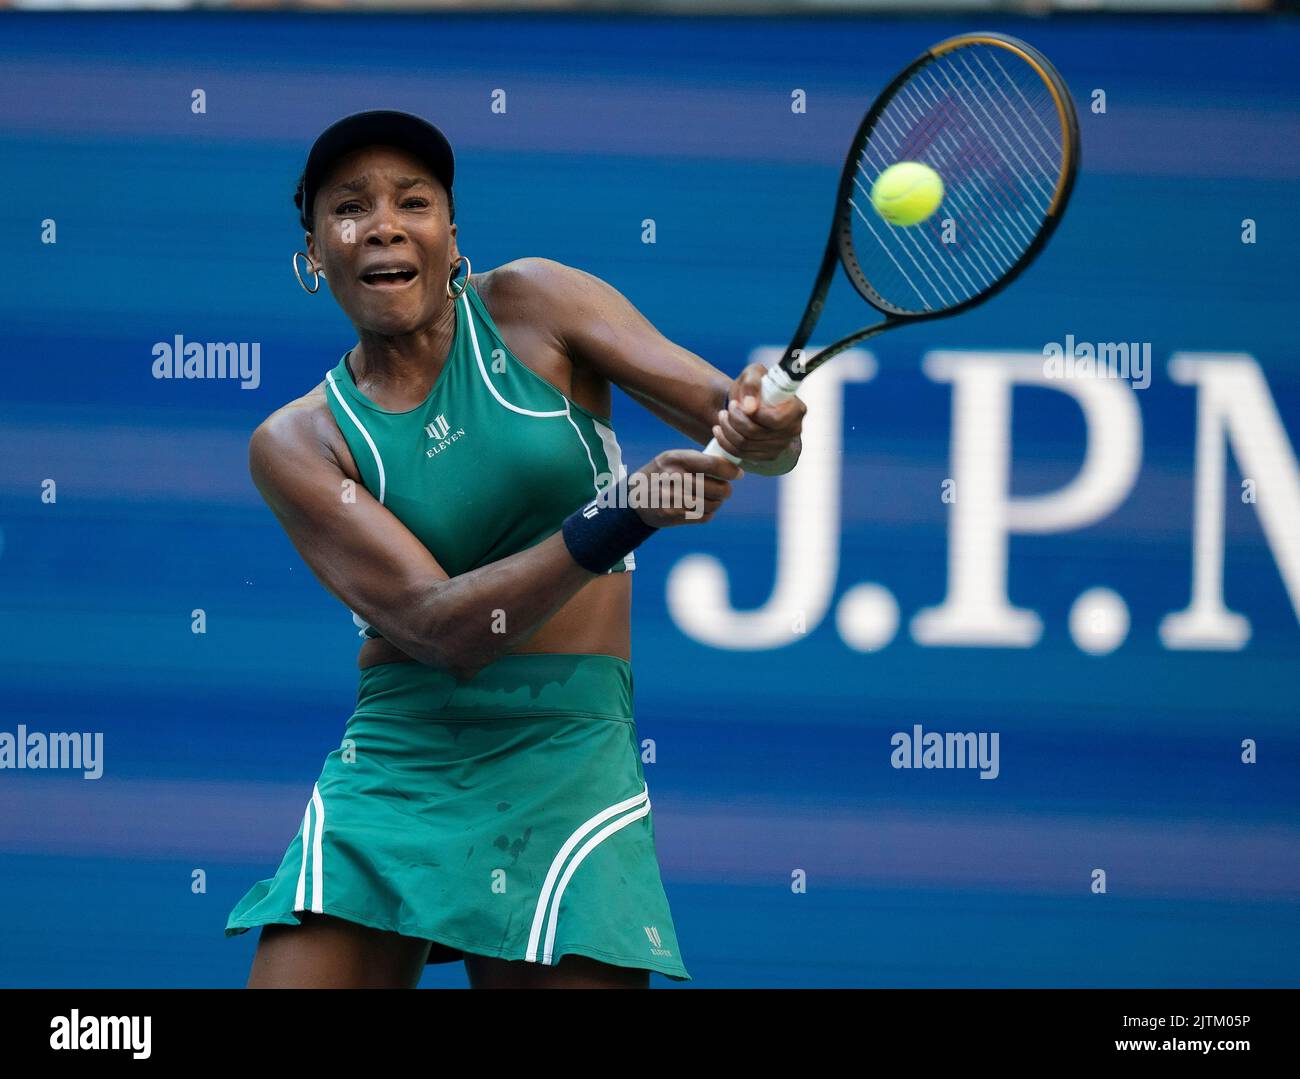 Aug 30, 2022; New York, NY, USA; Venus Williams (USA) in her match against Alison Van Uytvanck (BEL) on day two of the 2022 US Open